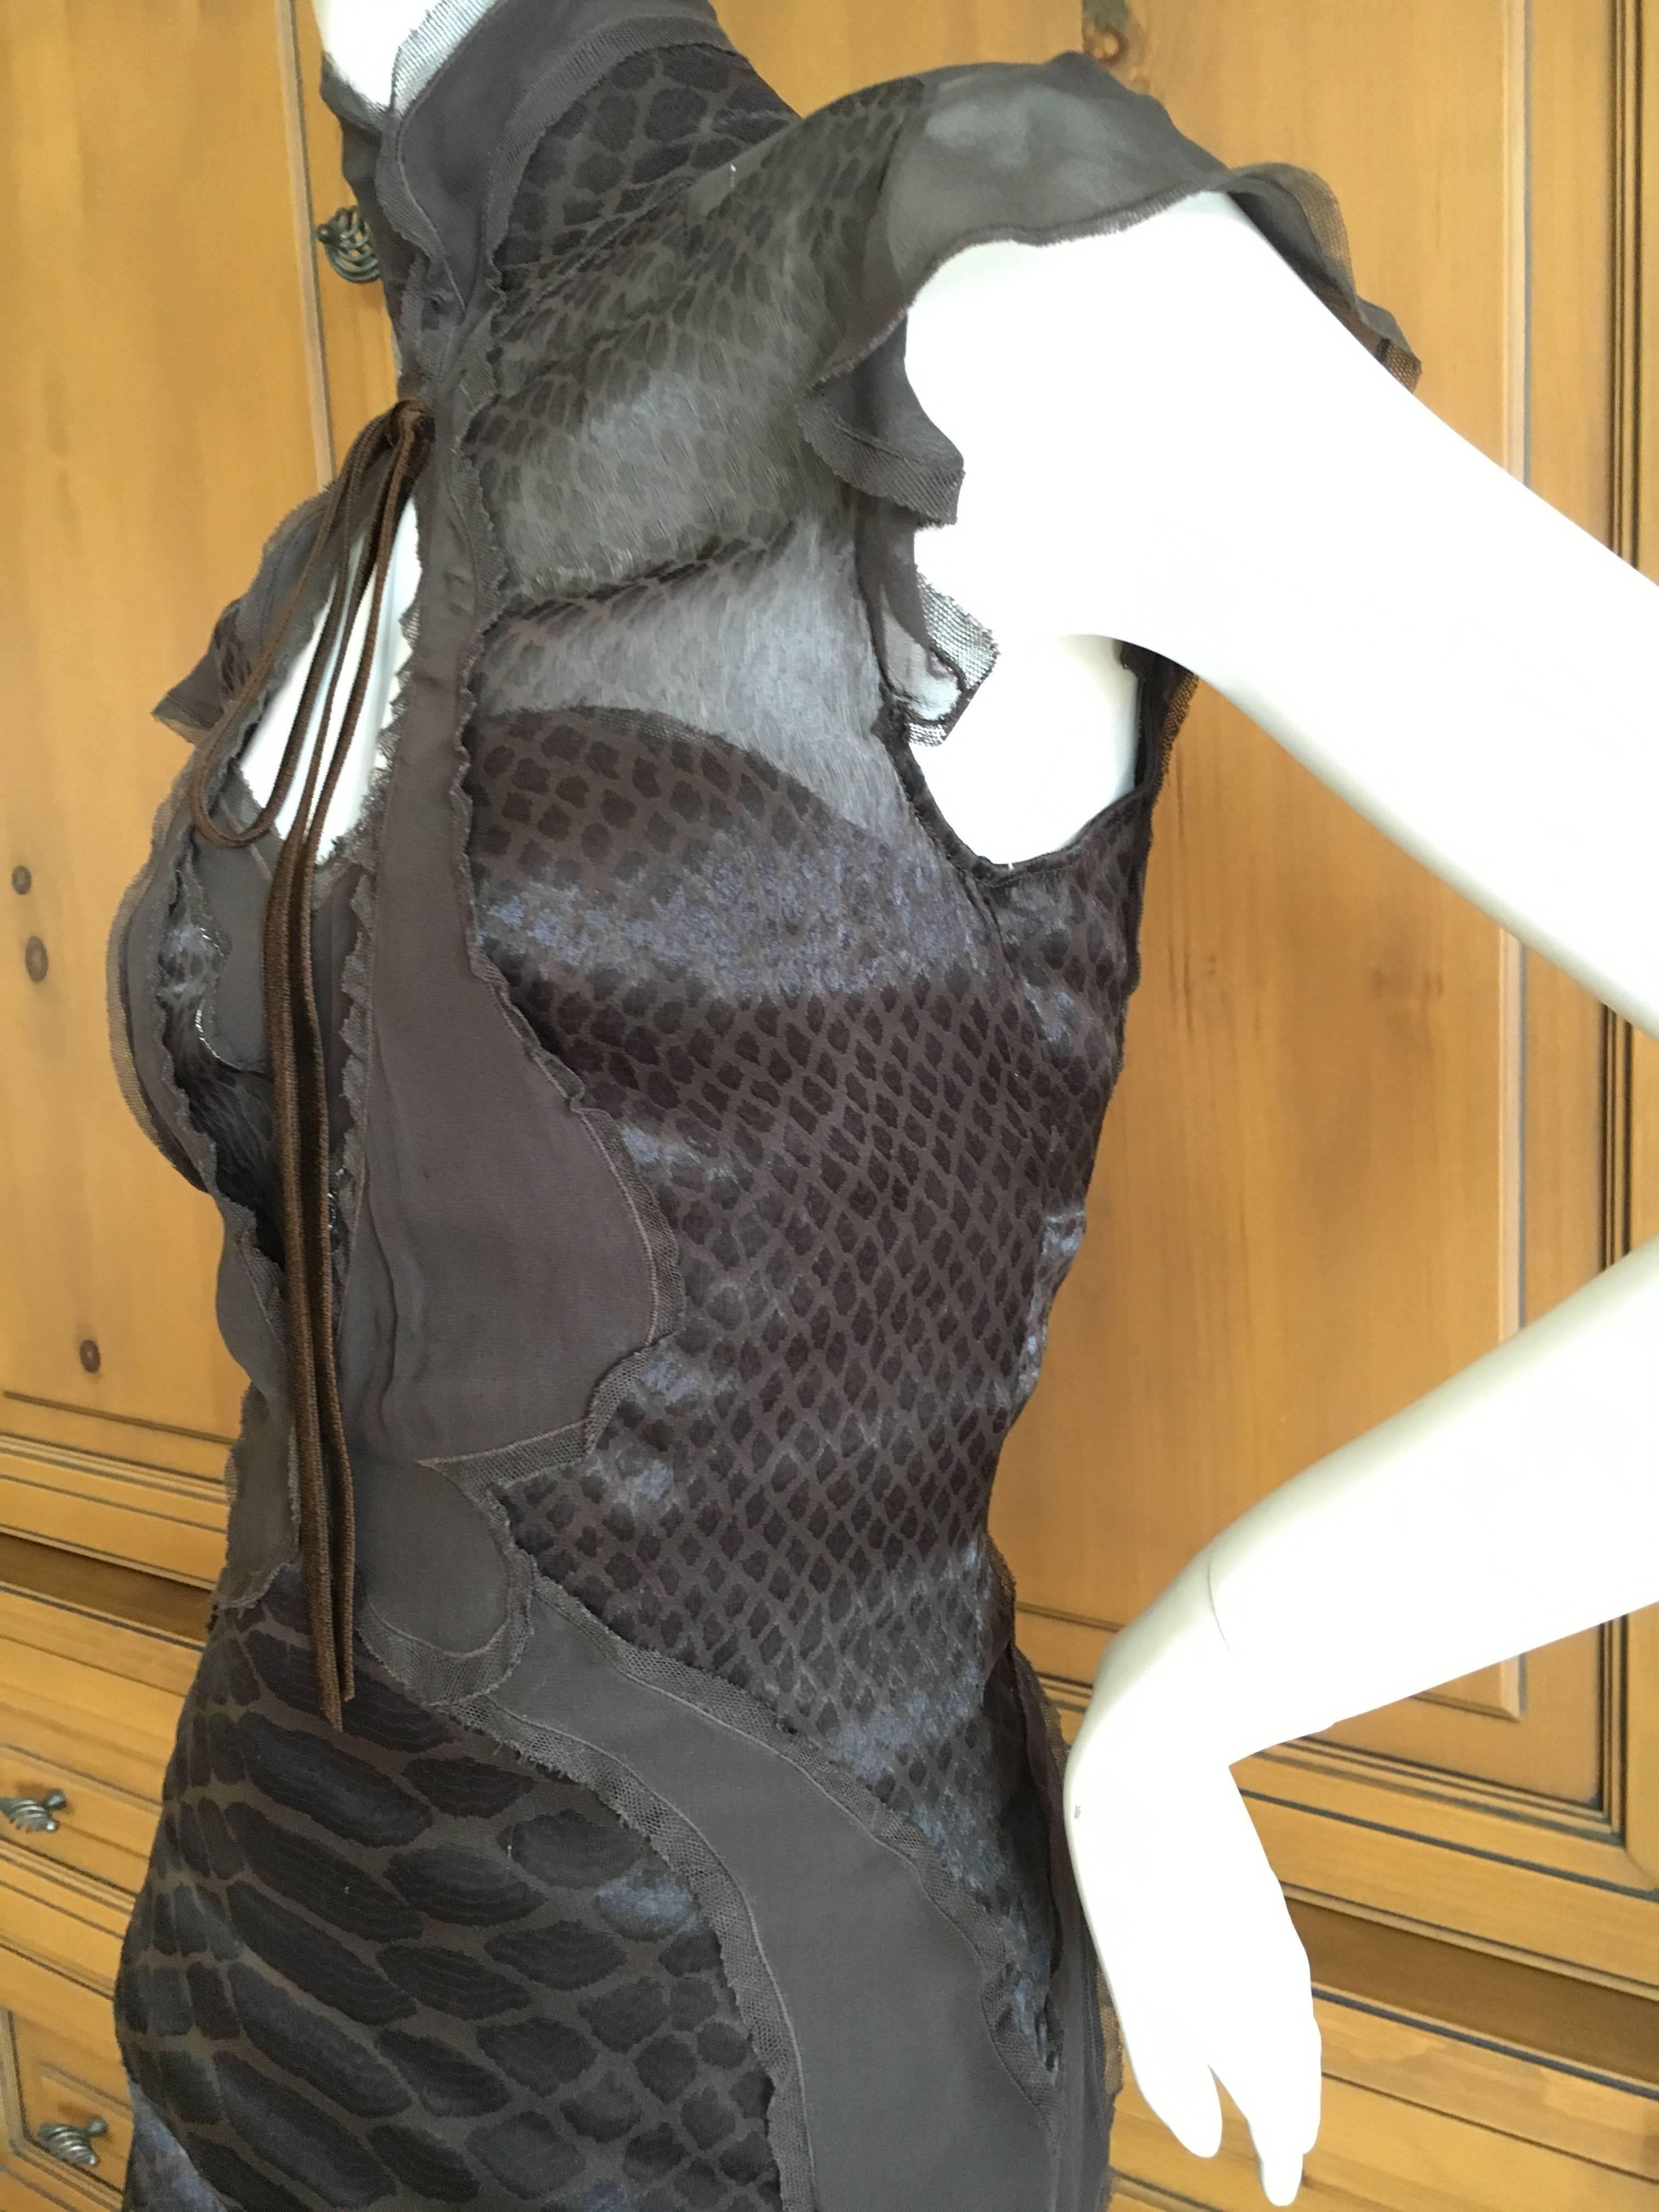 Super sexy sheer reptile print dress and under slip from Tom Ford for Yves Saint Laurent RIve Gauche.
SIze 38
Bust 36